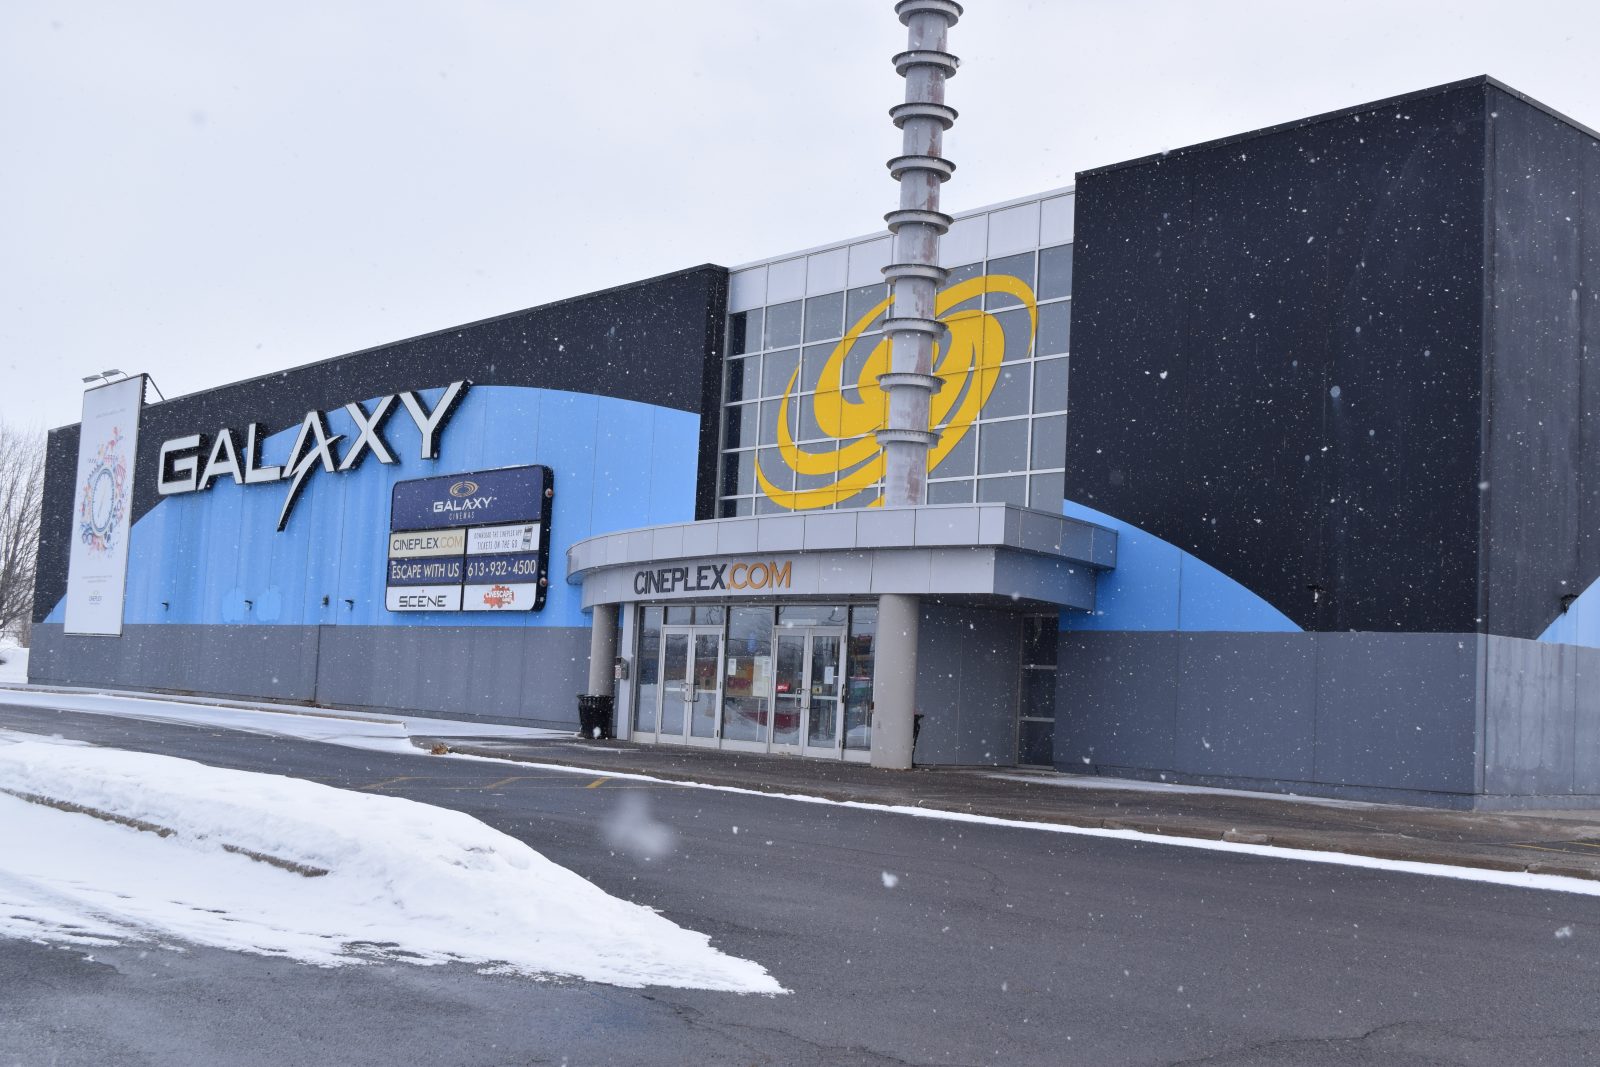 Cornwall Cineplex to re-open this week